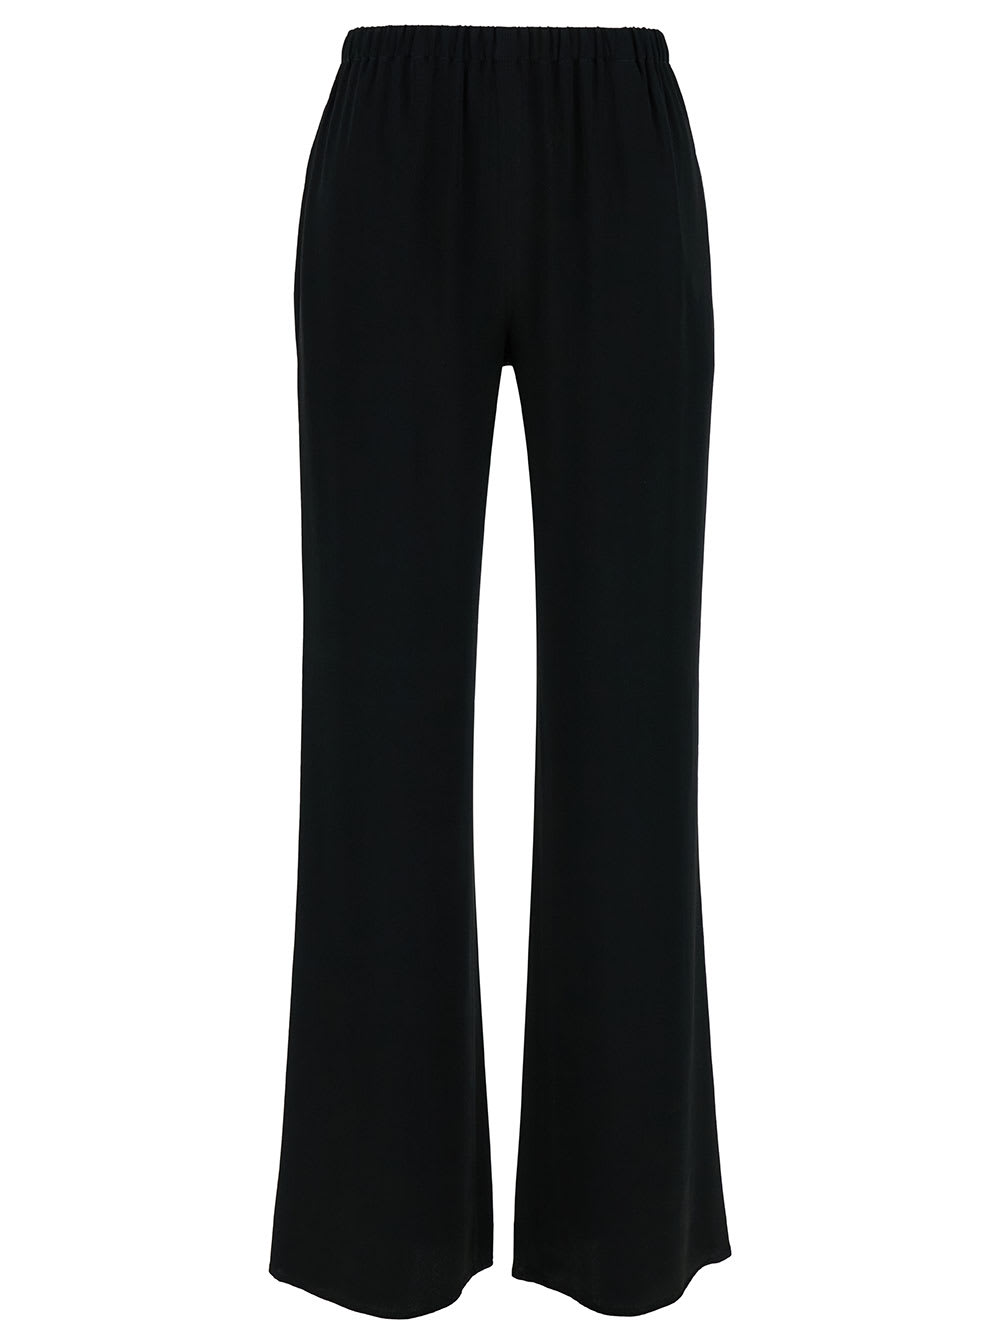 Black Loose Pants With Elastic Waistband In Silk Blend Woman